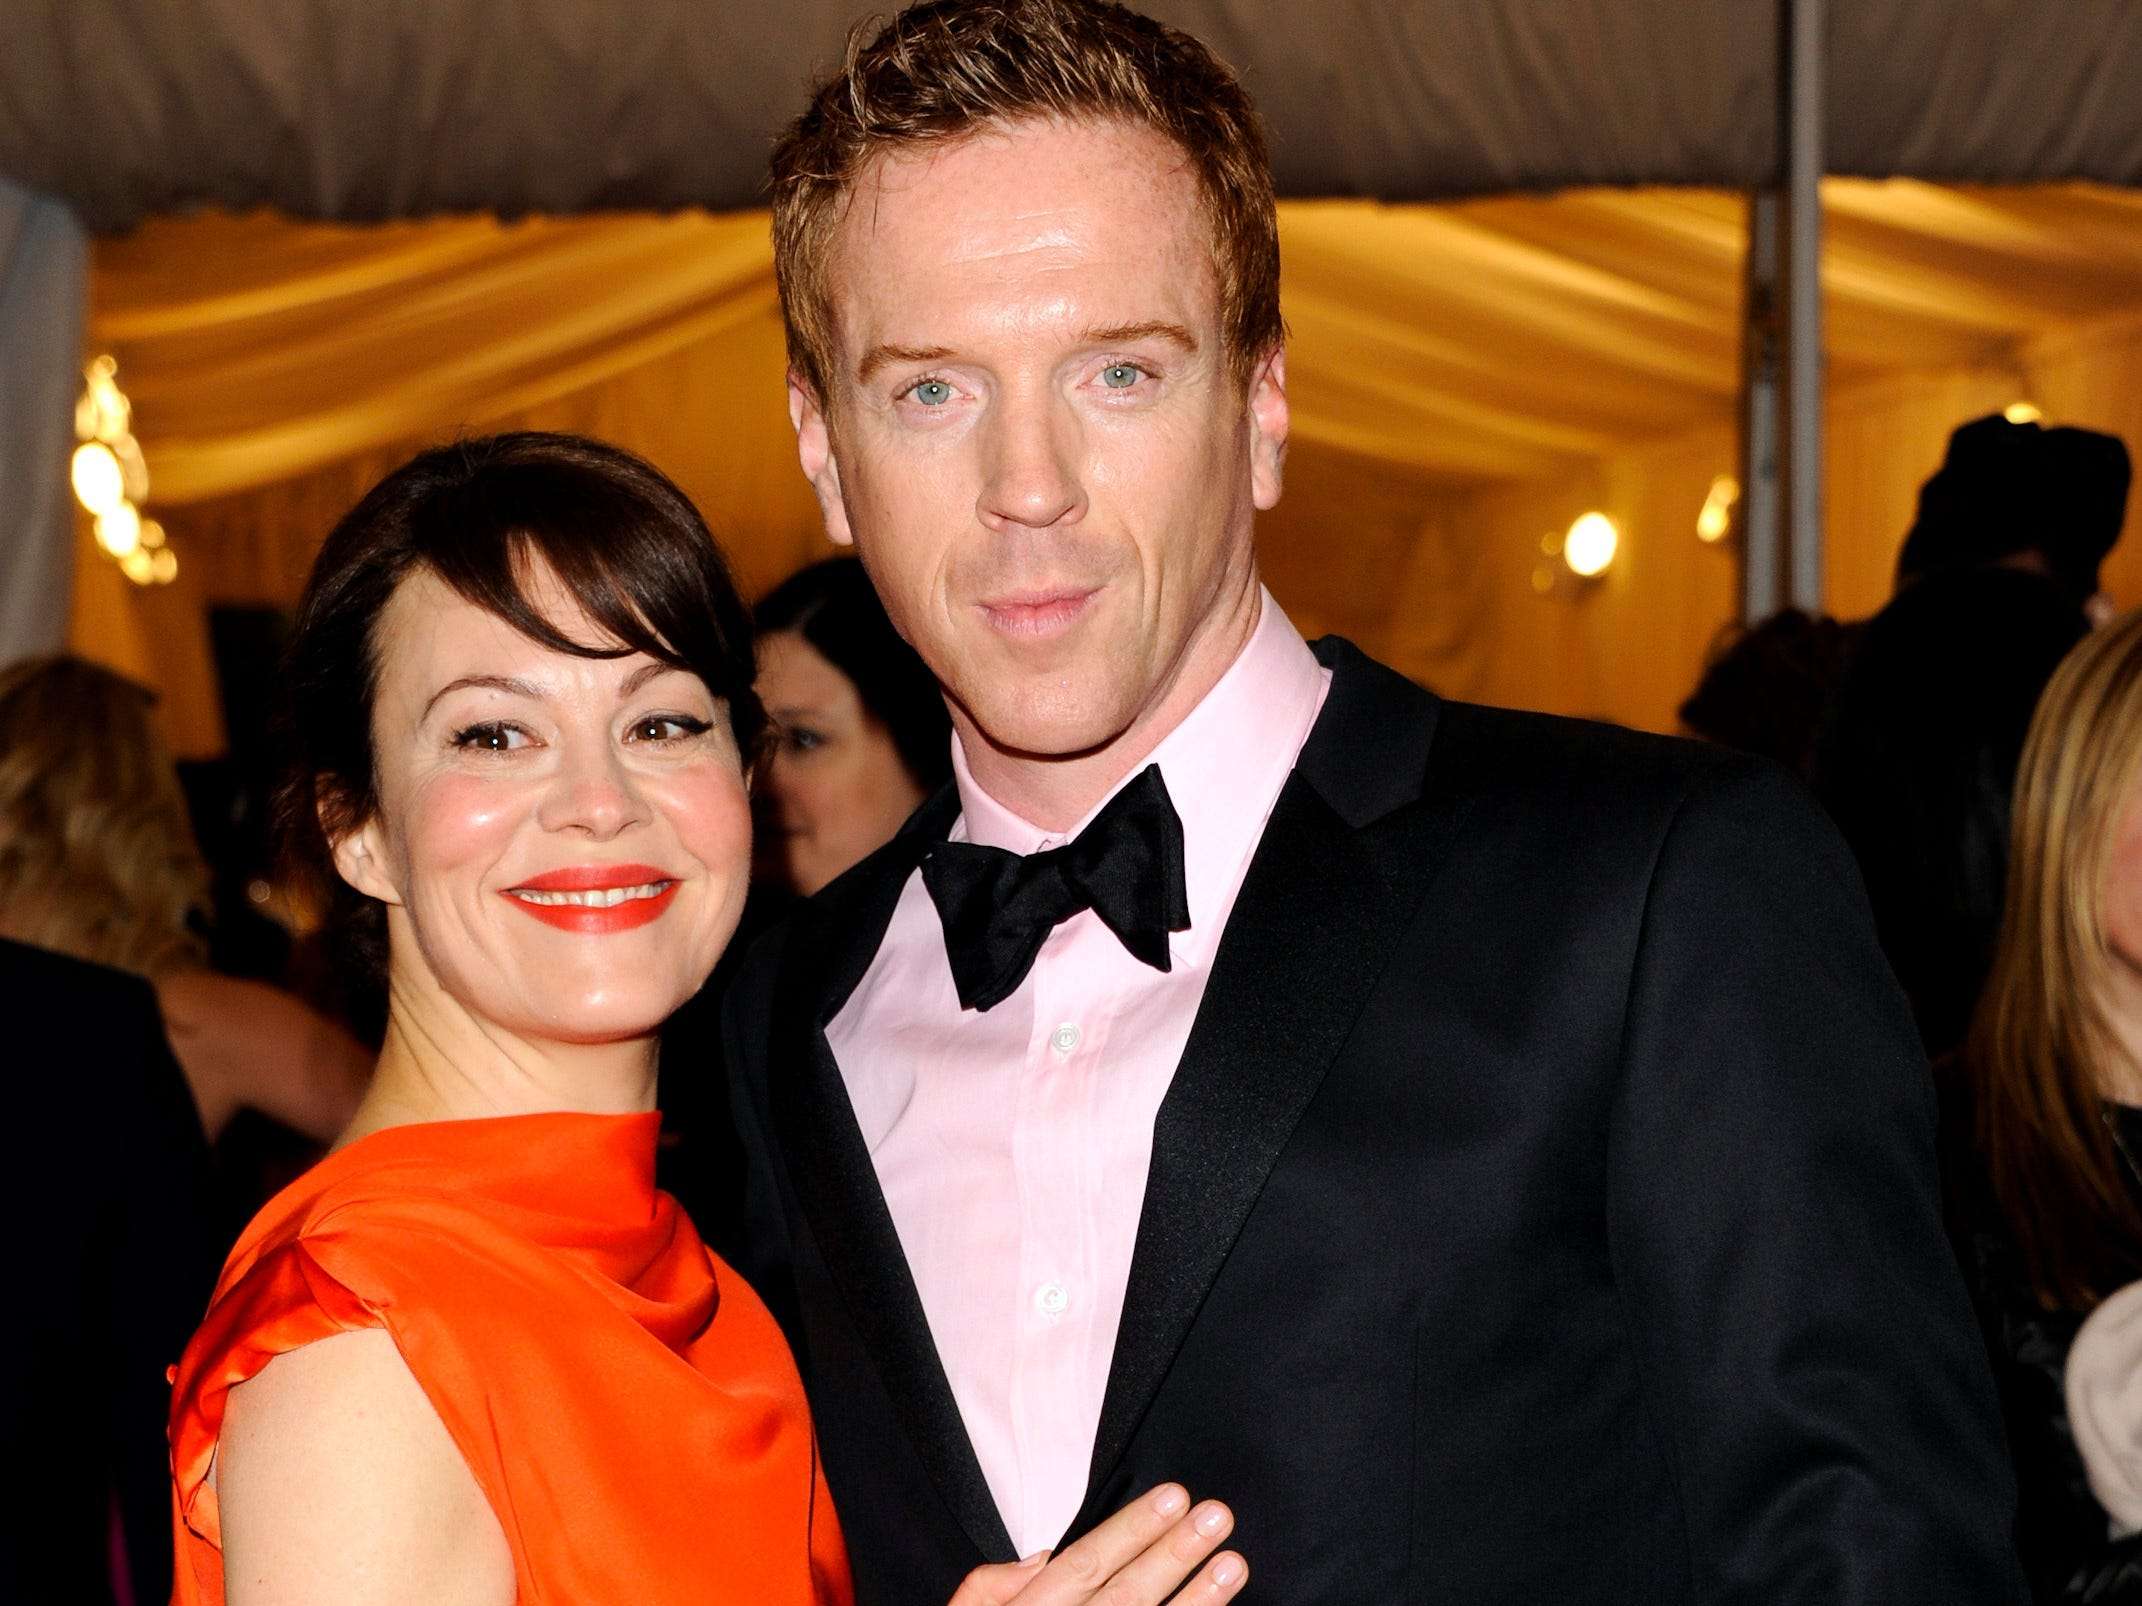 Tributes to 'Harry Potter' actress Helen McCrory are pouring in after news of her death ...